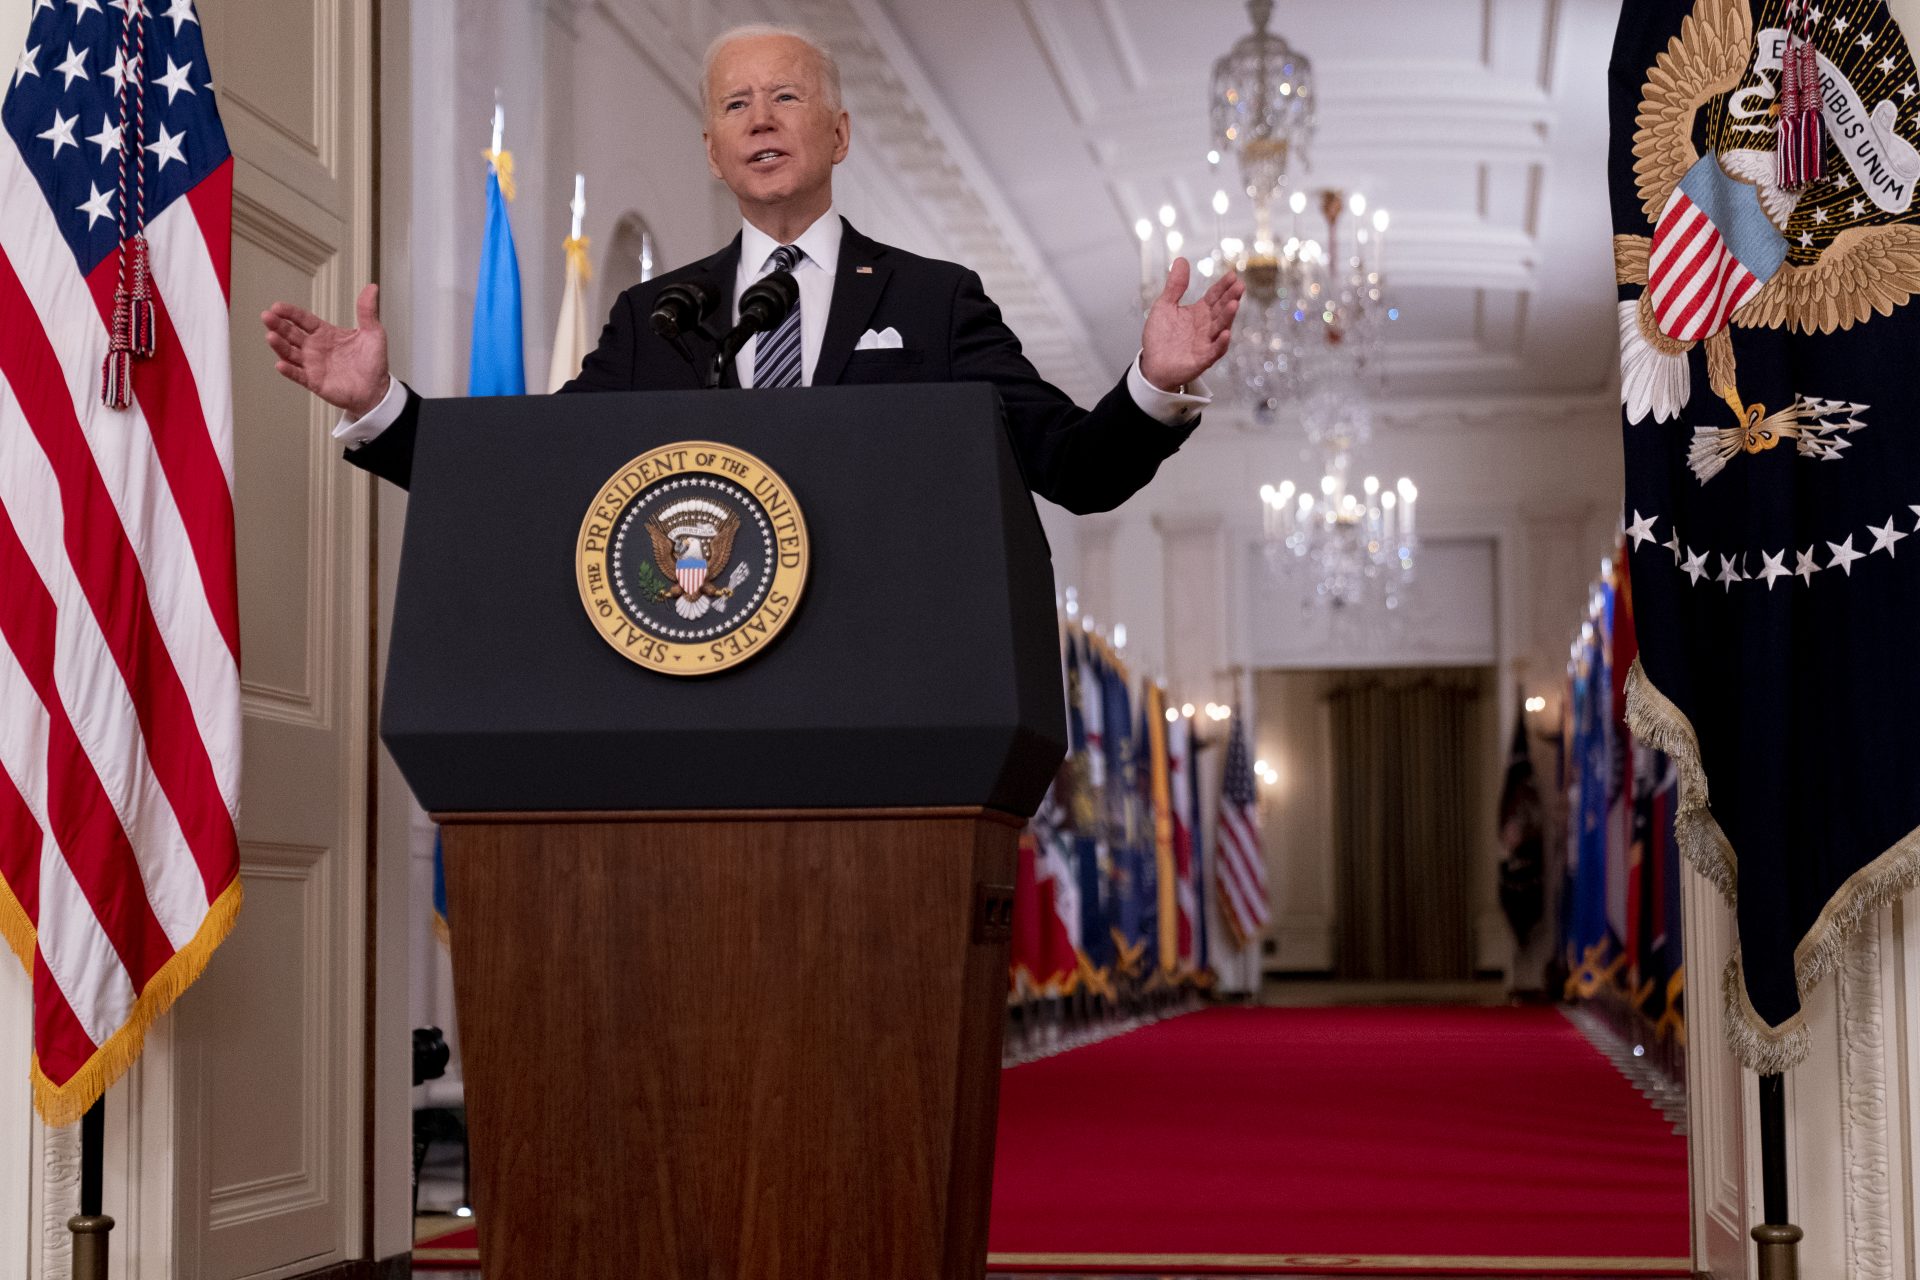 President Joe Biden speaks about the COVID-19 pandemic during a prime-time address from the East Room of the White House, Thursday, March 11, 2021, in Washington.